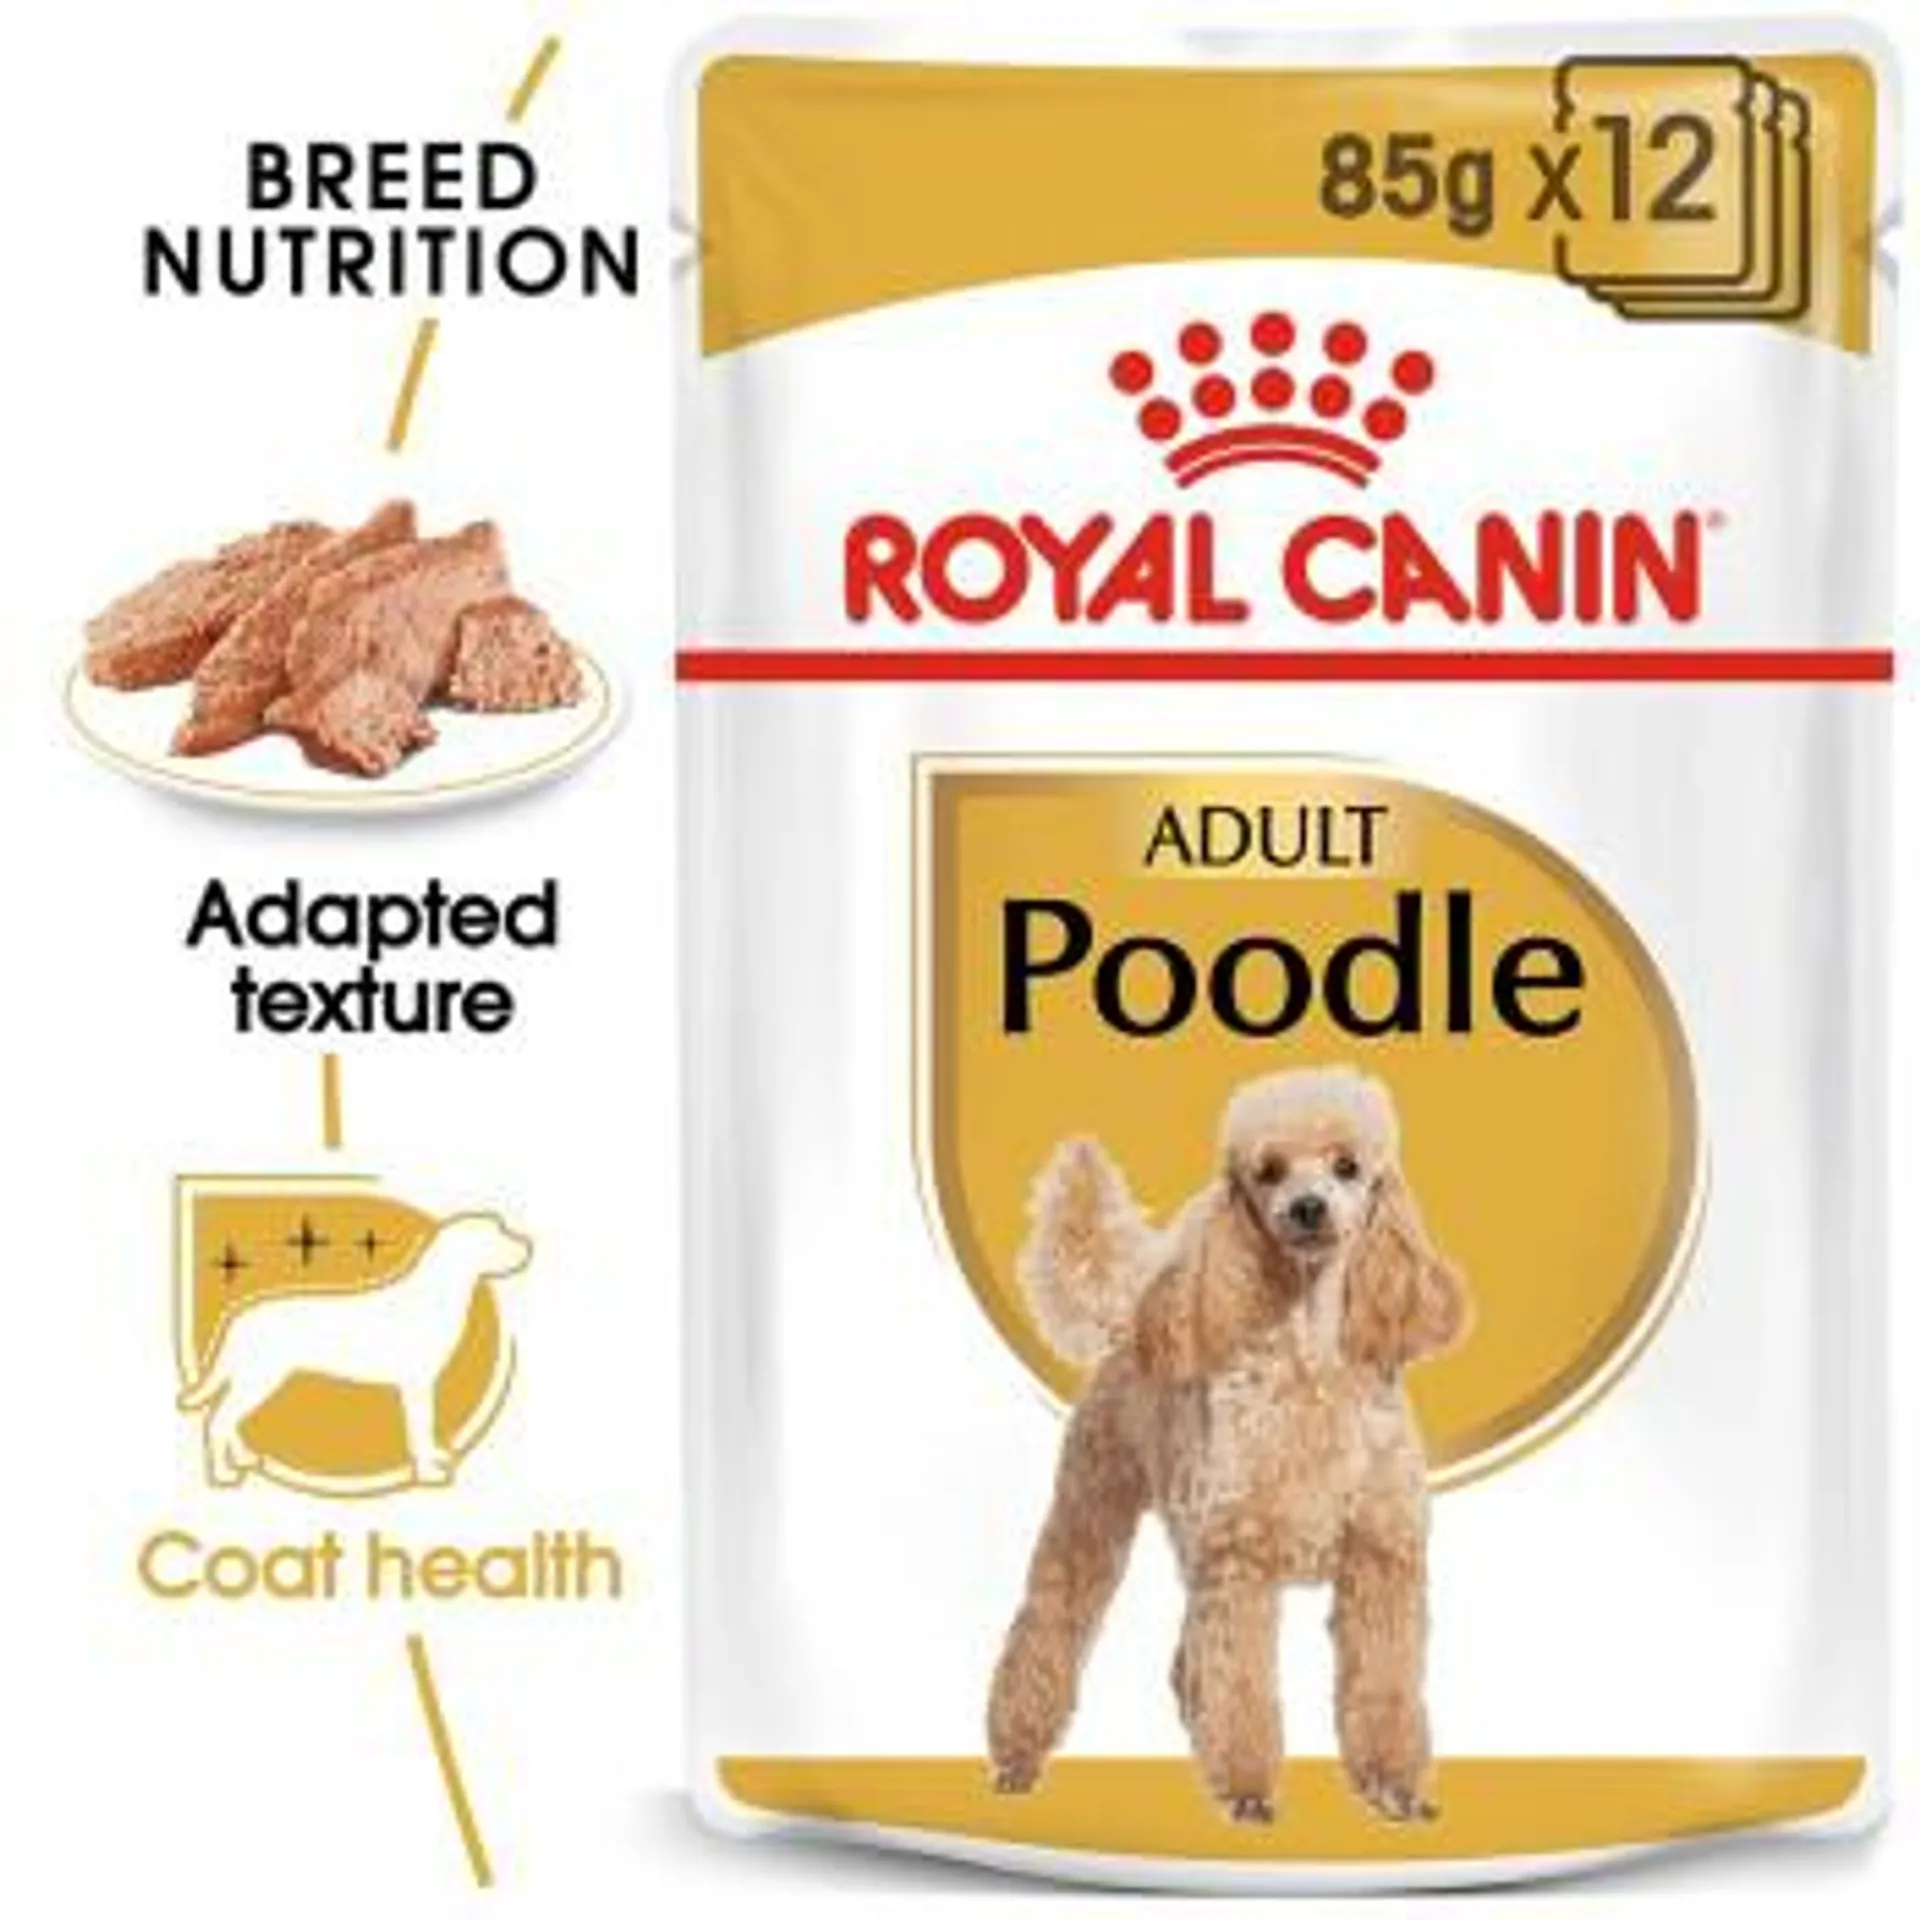 ROYAL CANIN Poodle Adult in Sauce 12x85g 12x85 g